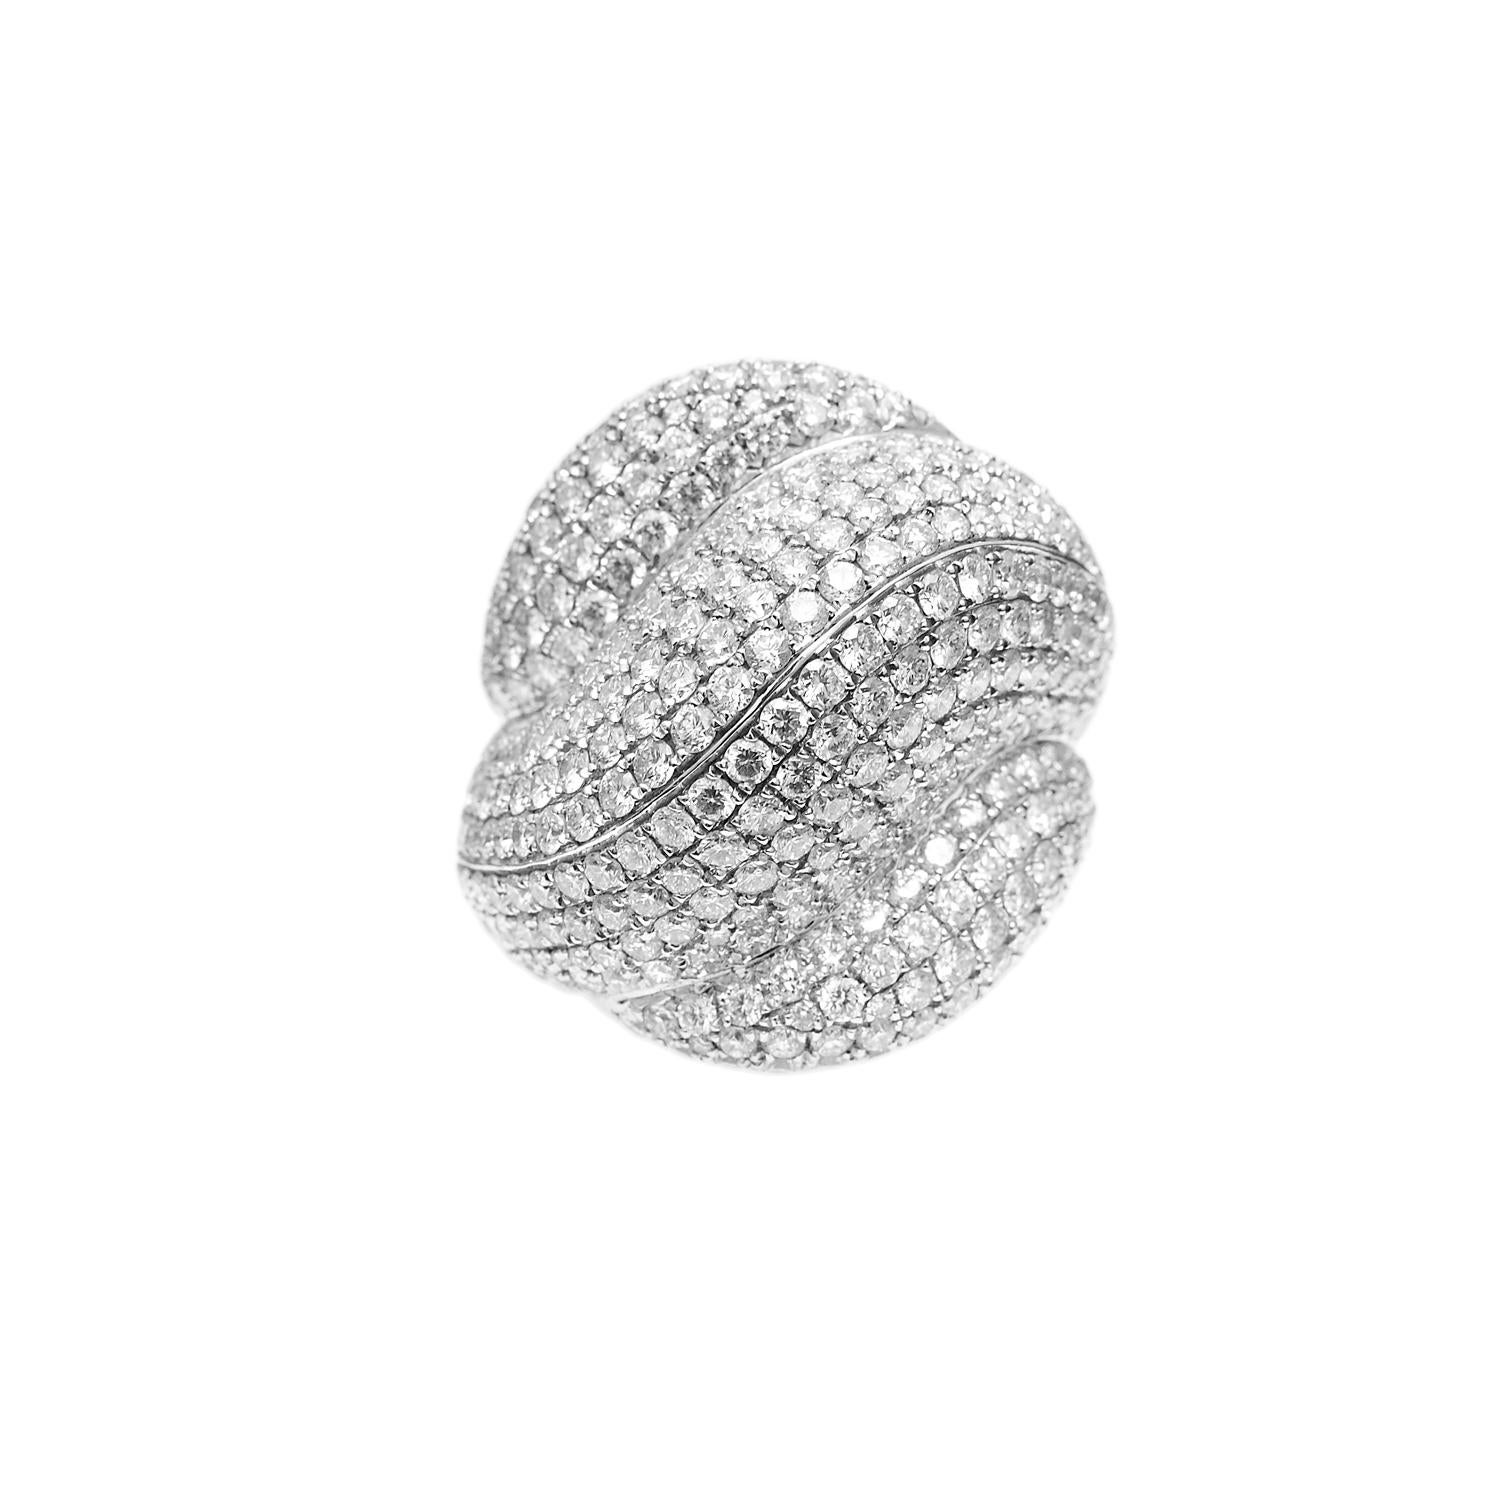 Want to be bold and glitzy? Need a Statement cocktail ring? We have you covered. This delicately hand-crafted piece shows of its curve in bright shining diamond pavé with 5.6ct of diamonds.